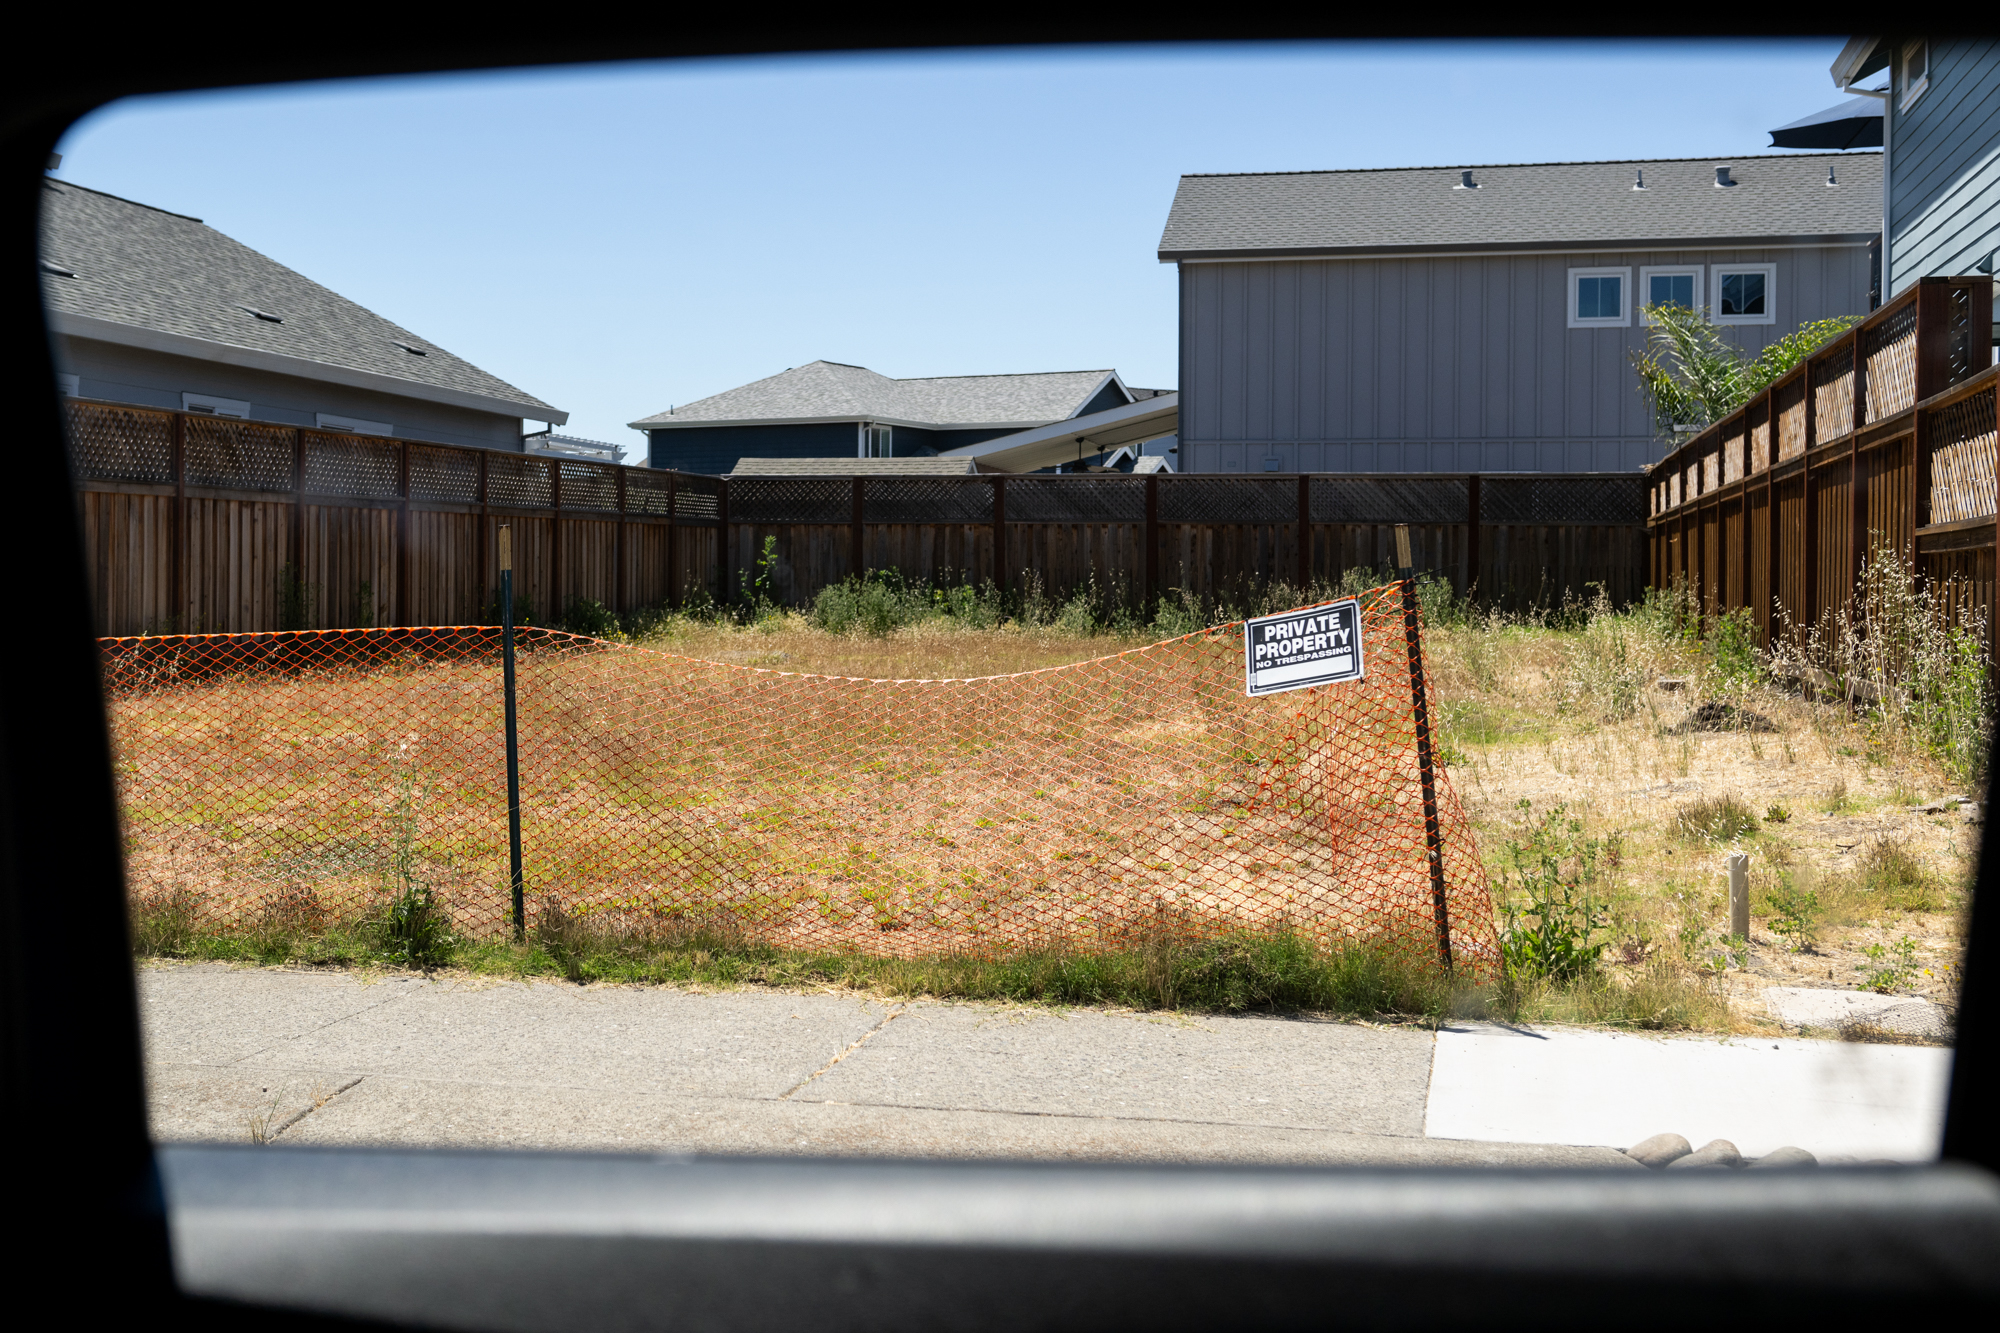 A large empty lot with overgrown grasses surrounded by houses.